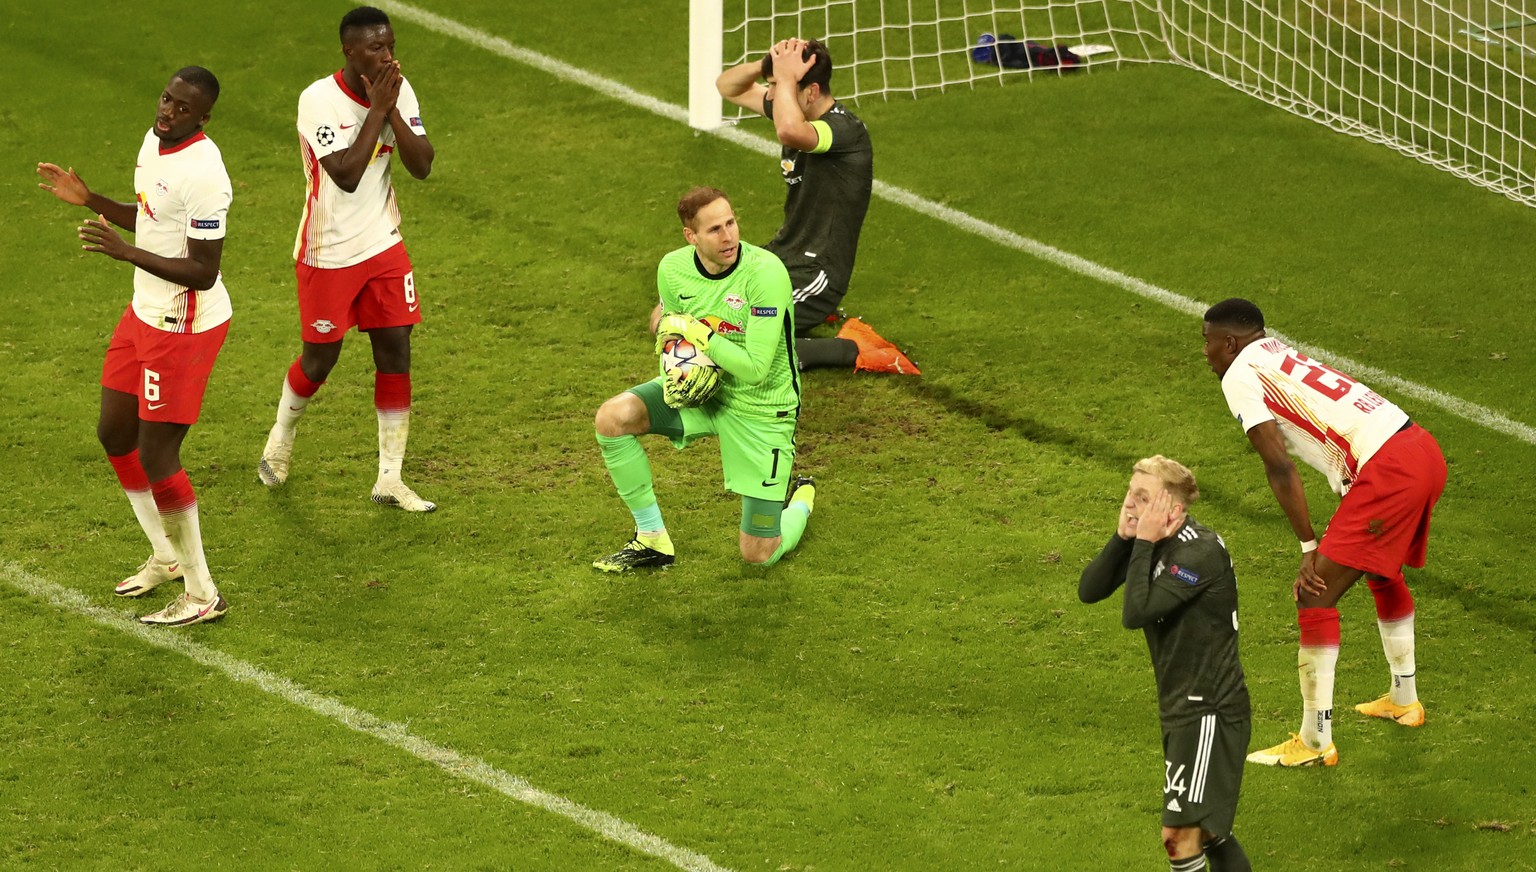 Manchester United&#039;s Donny van der Beek, foreground right, and team mate Harry Maguire, background top, react as Leipzig&#039;s goalkeeper Peter Gulacsi saves the ball during the Champions League  ...